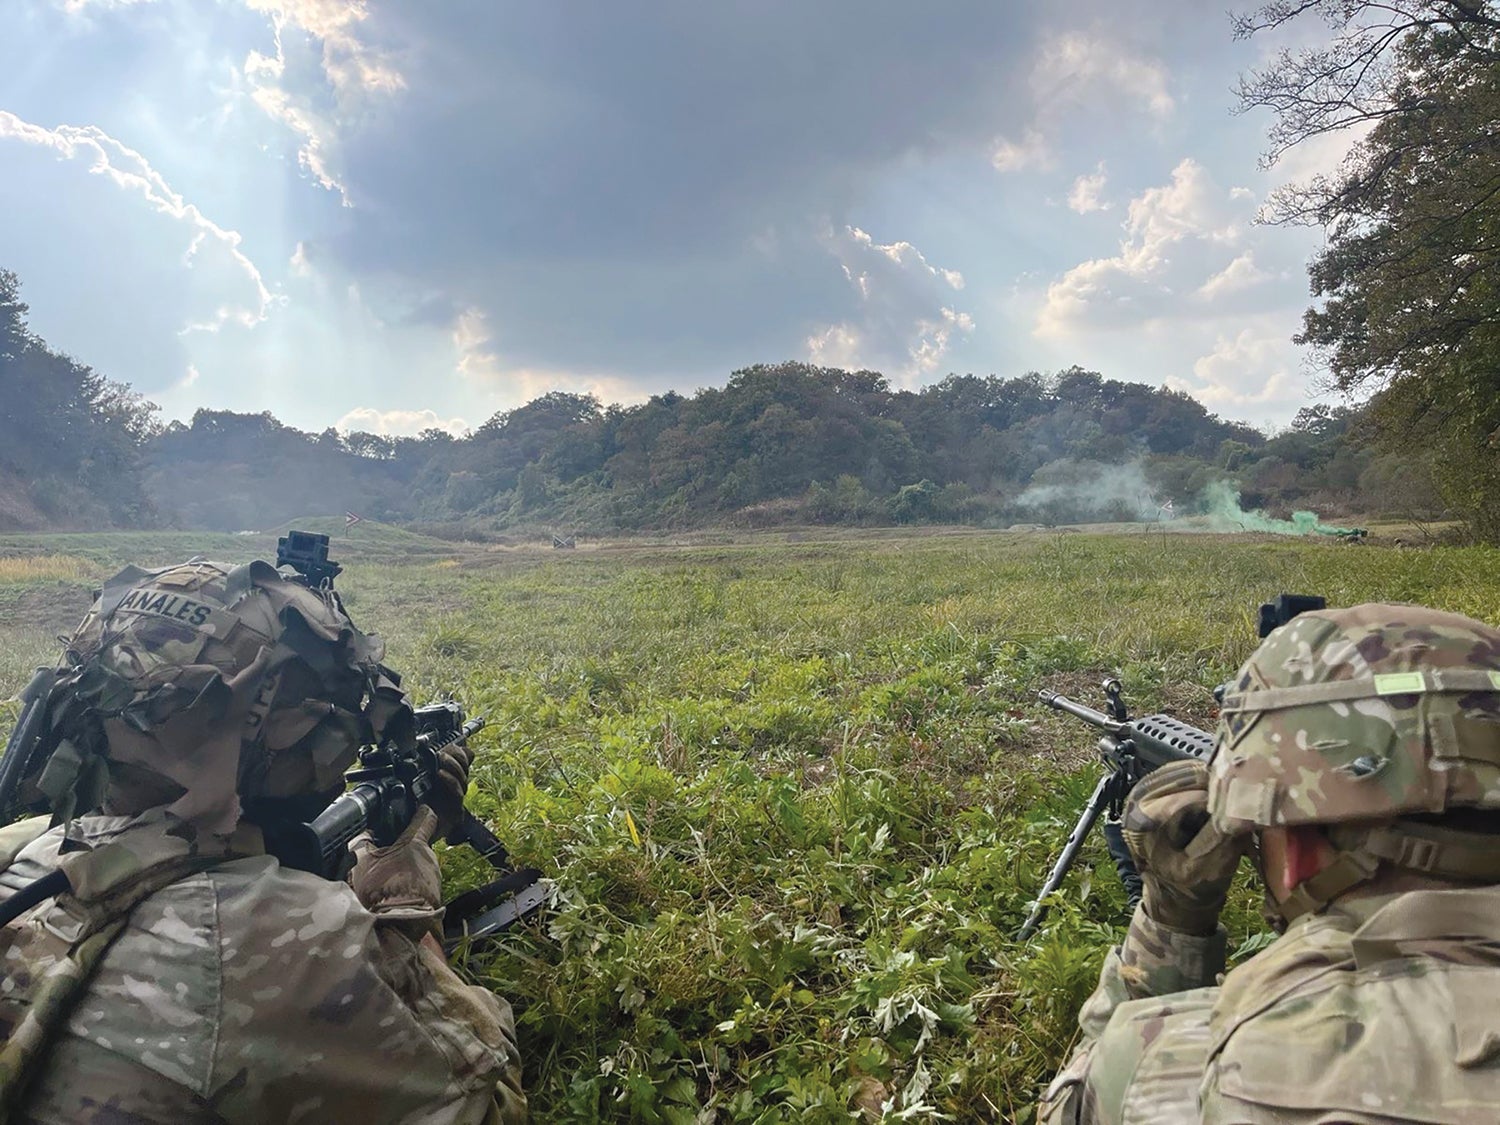 Soldiers with the 2nd Battalion, 12th Infantry Regiment, watch over a target during training at a live-fire range in South Korea. (Credit: U.S. Army/Capt. William Romine)